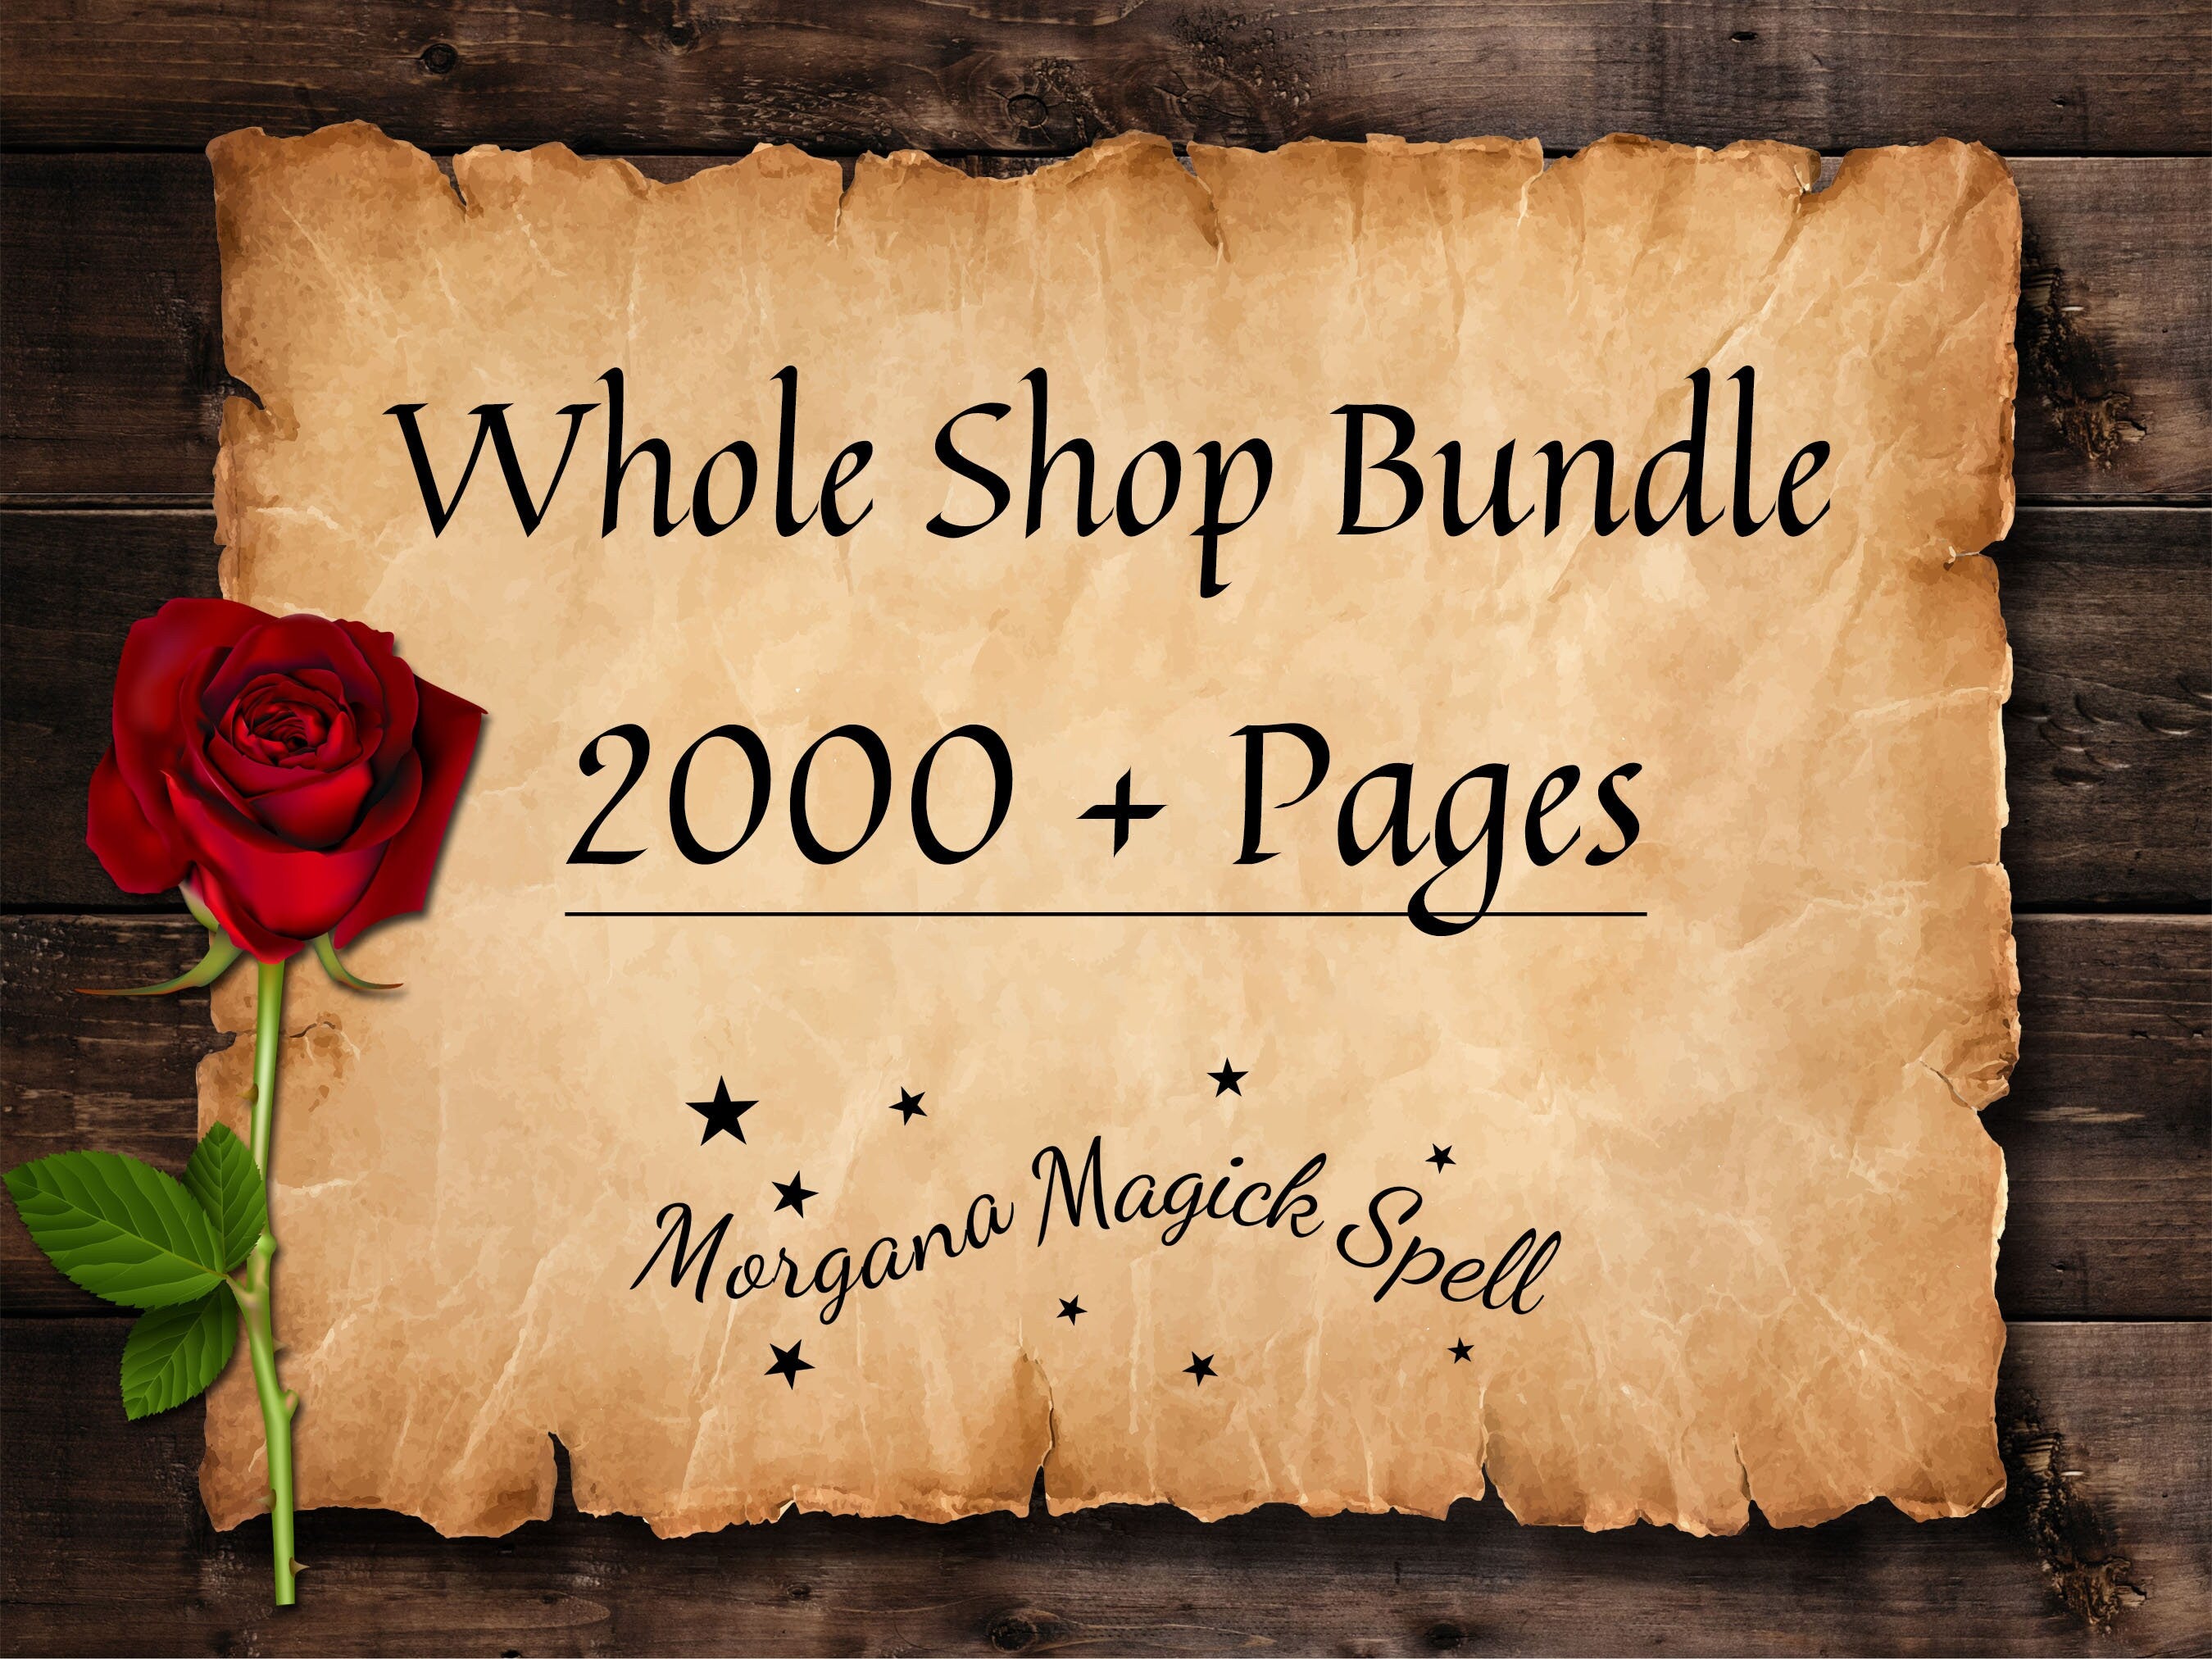 WHOLE SHOP BUNDLE, Over 2000 Pages, Giant Grimoire Spellbook, Everything in the Shop Digital Download, Entire Store pdf, Wicca & Witchcraft - Morgana Magick Spell